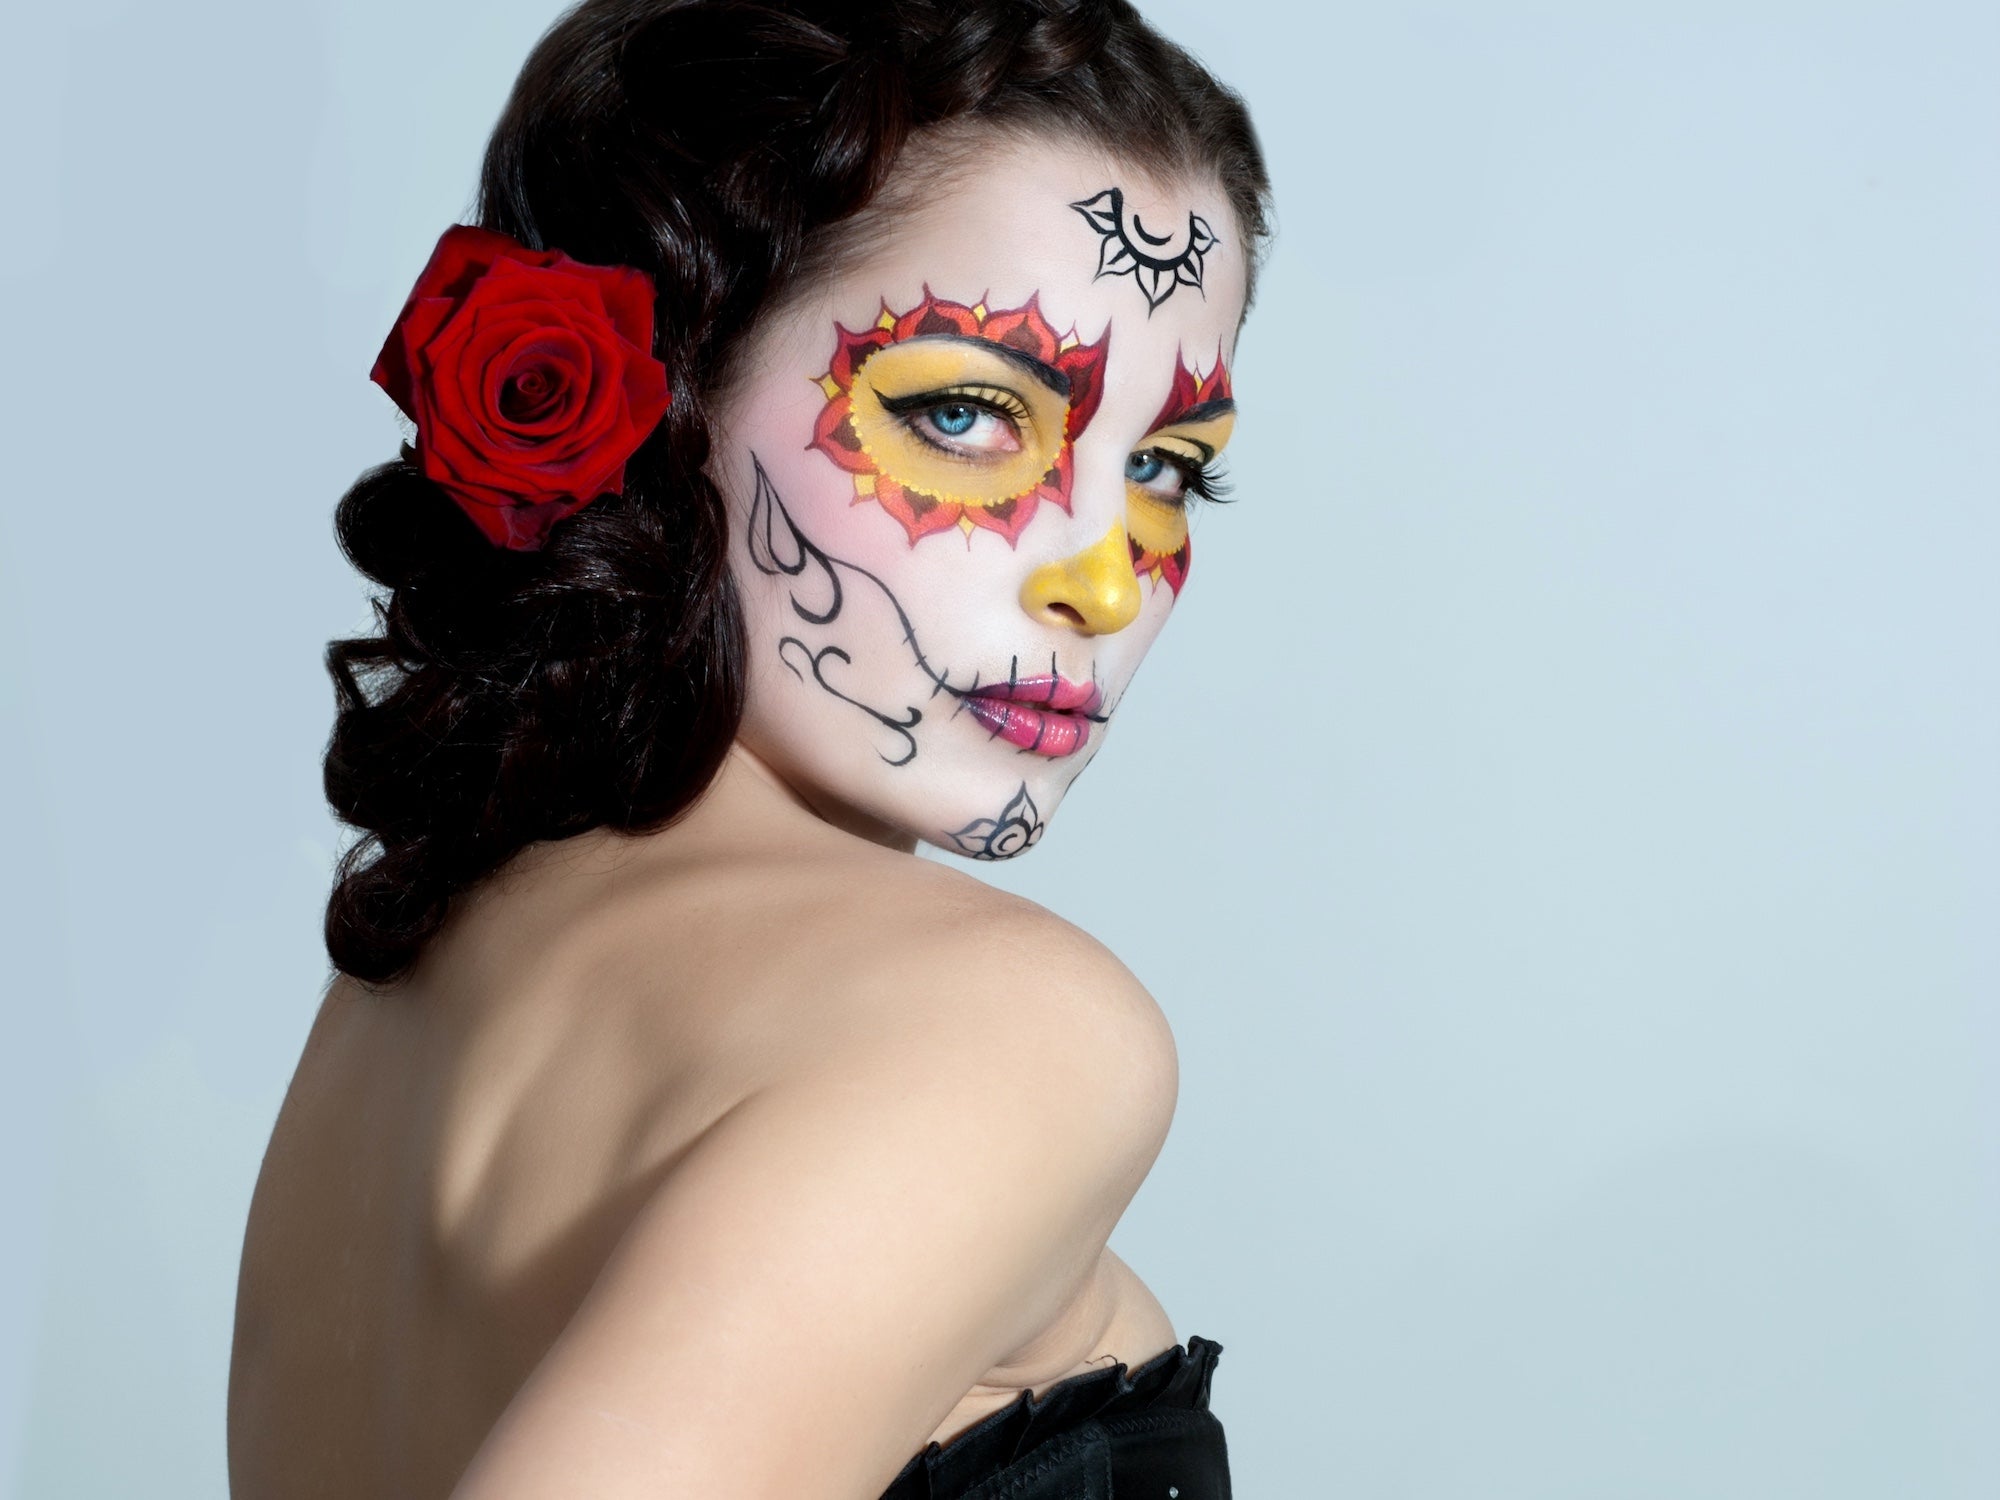 How to Safely Apply (and Remove) Halloween Face Paint Like an Expert